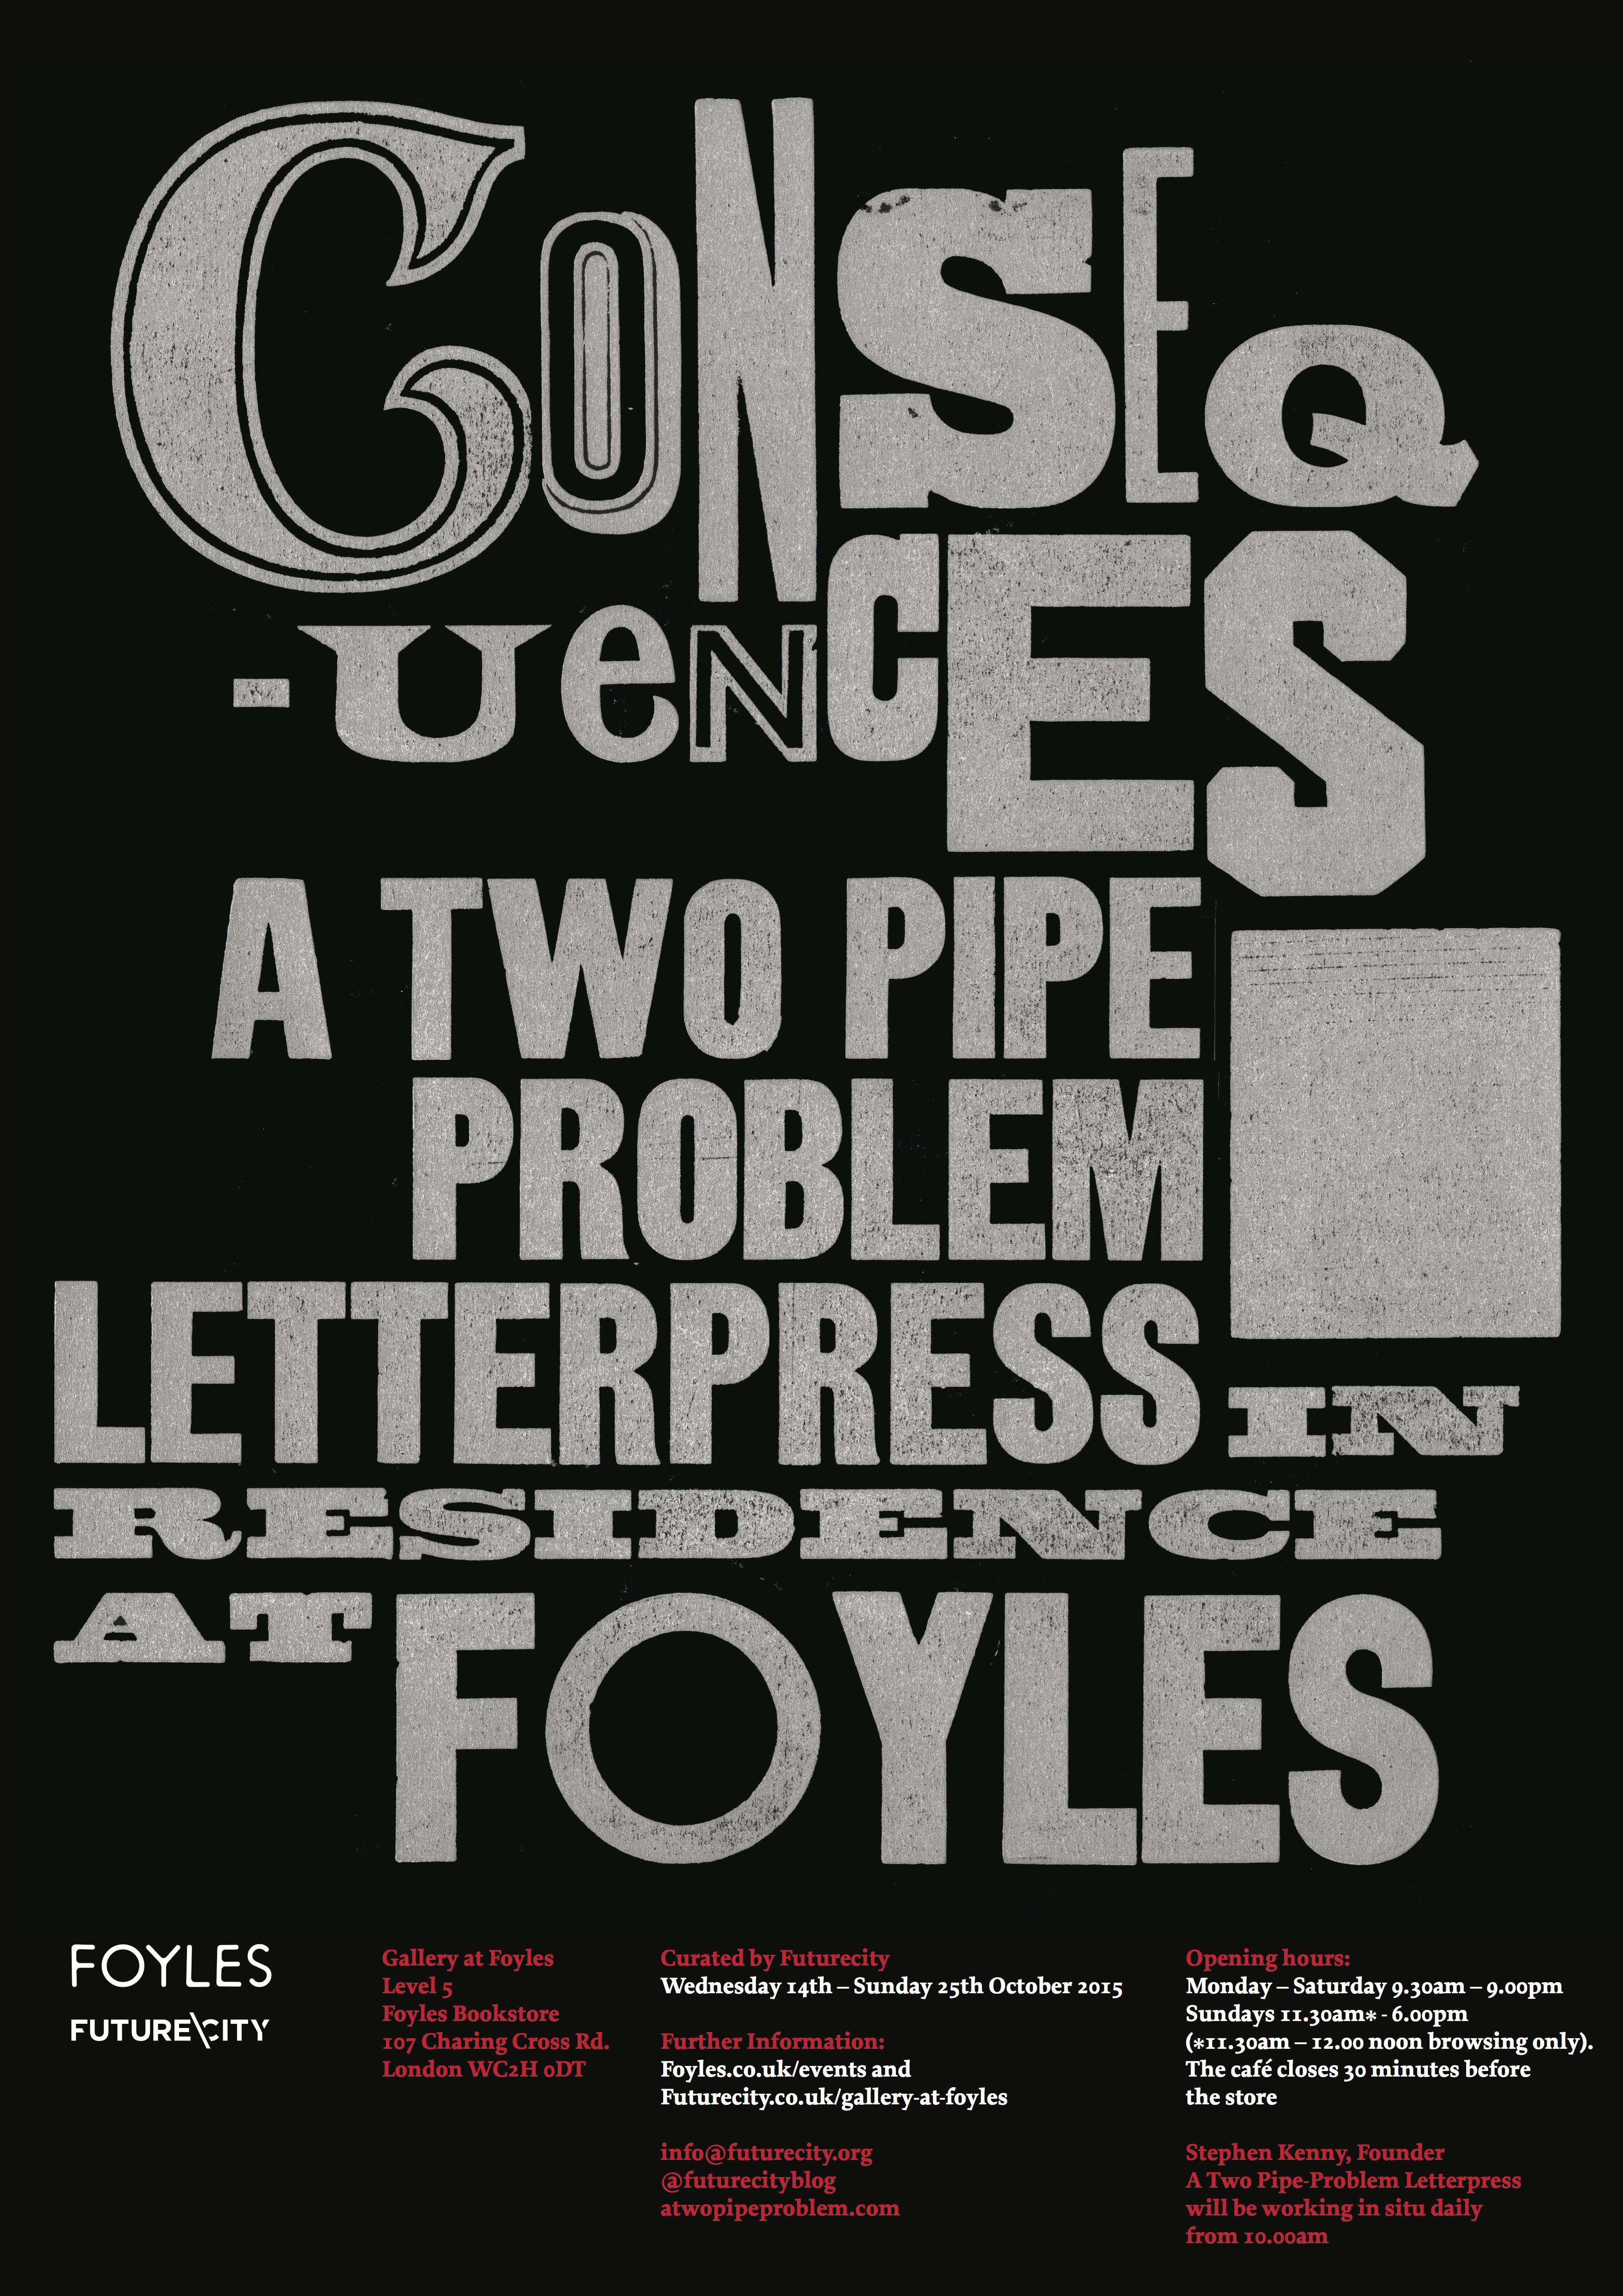 Pop Up Launch: A Two Pipe Problem Letterpress at The Gallery at